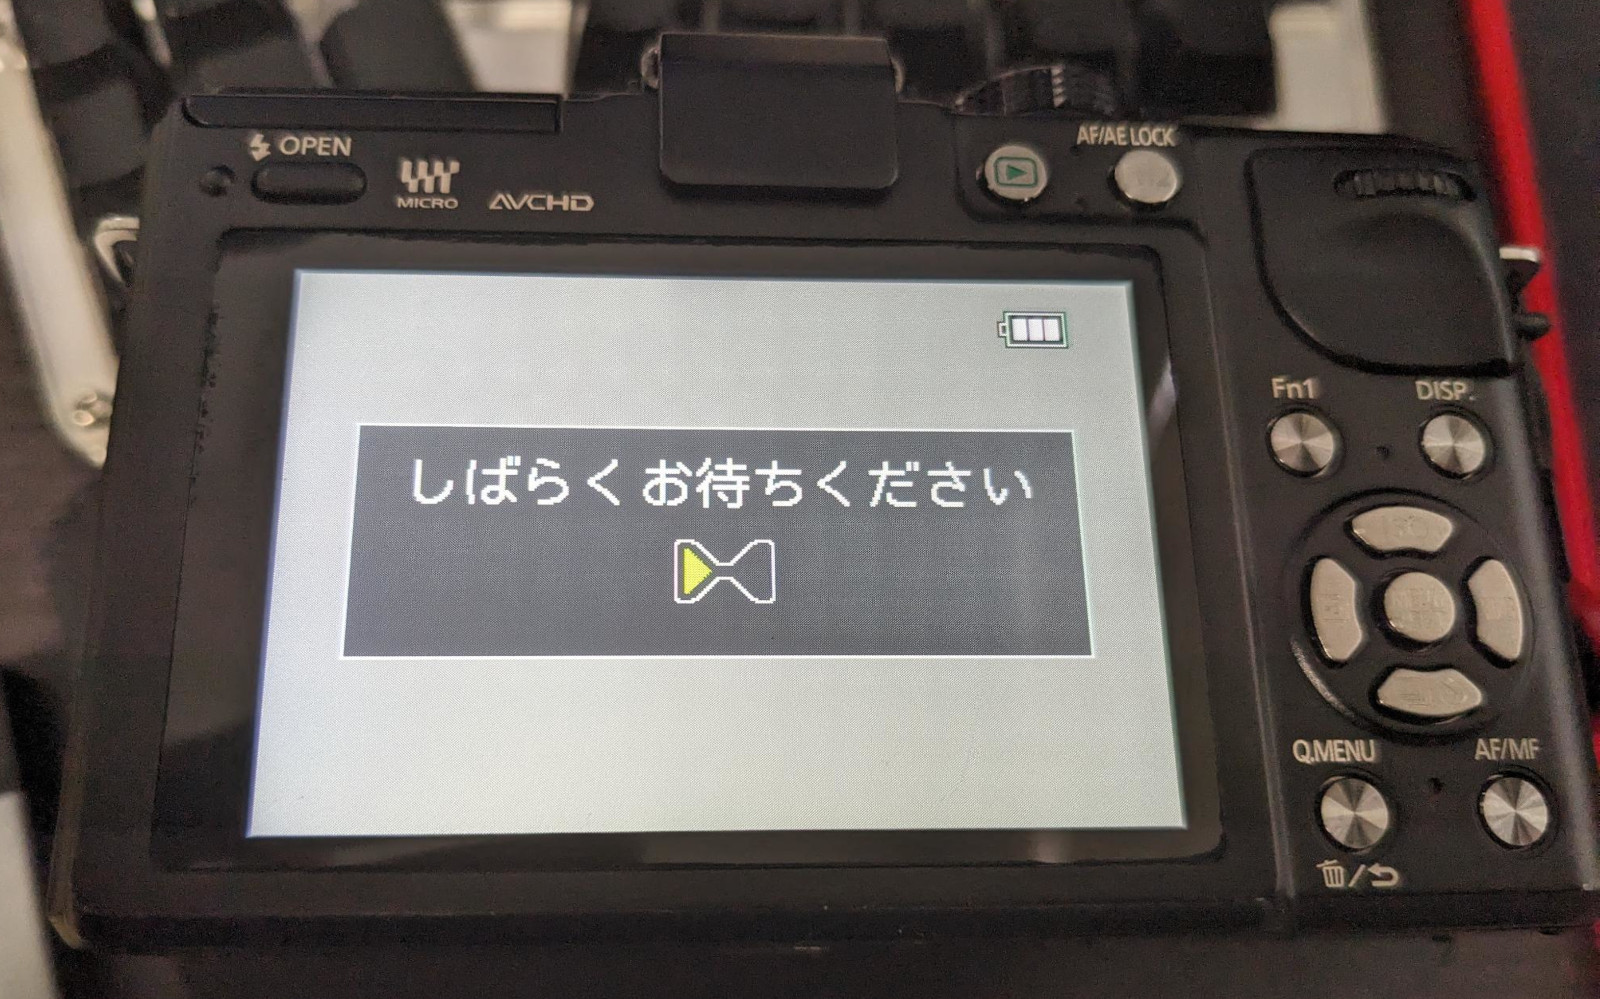 The Panasonic GX1 camera has discovered a firmware file